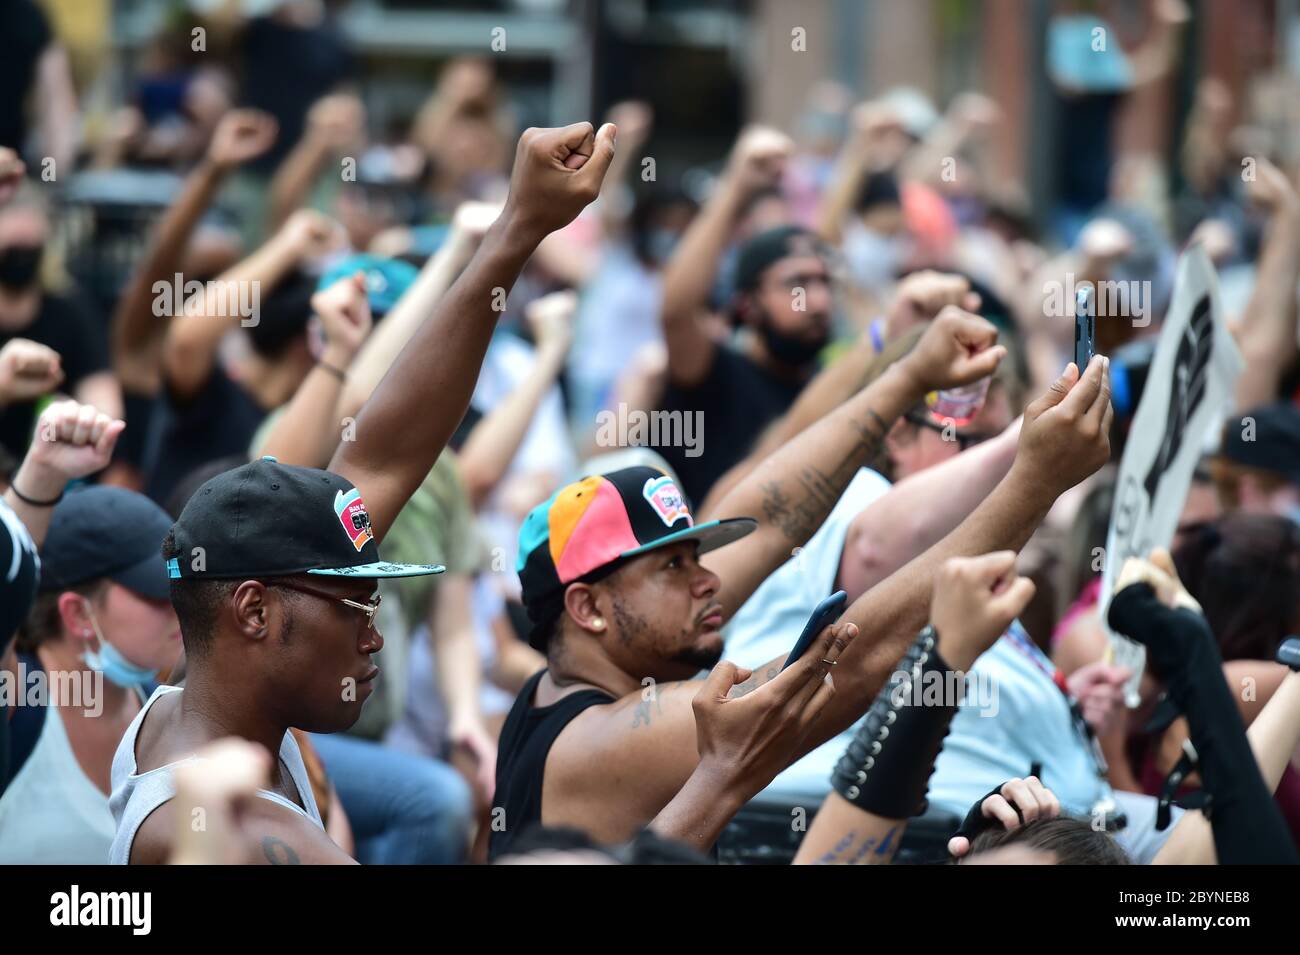 Black Lives Matter demonstrators marched through downtown San Antonio to protest the killings of Marquise Jones and Charles Roundtree by San Antonio Police.Marchers went from the city's Milam Park to the Bexar County Courthouse. The demostration was peaceful and no arrests were made. Stock Photo